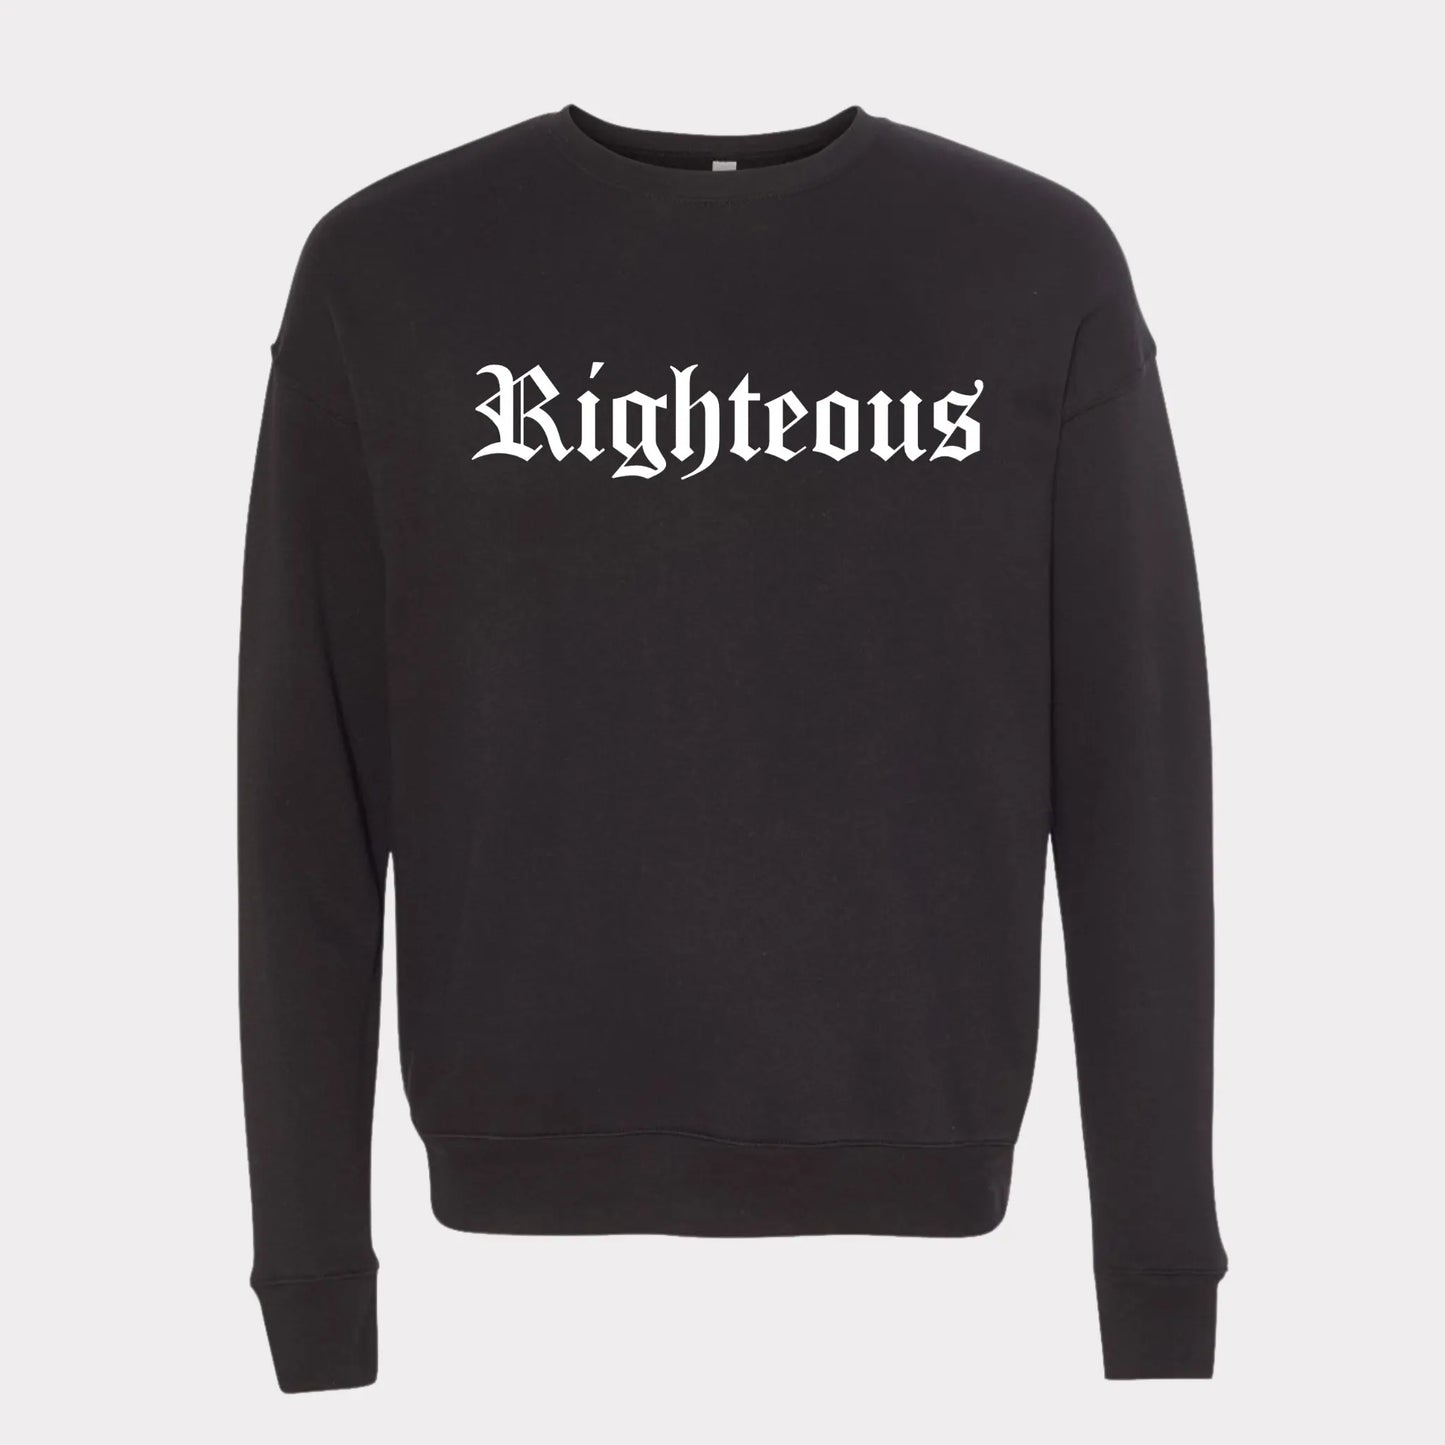 Black crew neck sweatshirt. Righteous written in bold white letters on the front of the black sweatshirt. Black sweatshirt, christian clothing, faith based apparel Righteous sweatshirt. Jesus inspired clothing. Oversized sweatshirt. loungewear. streetwear. Christian streetwear. Christian clothing brand